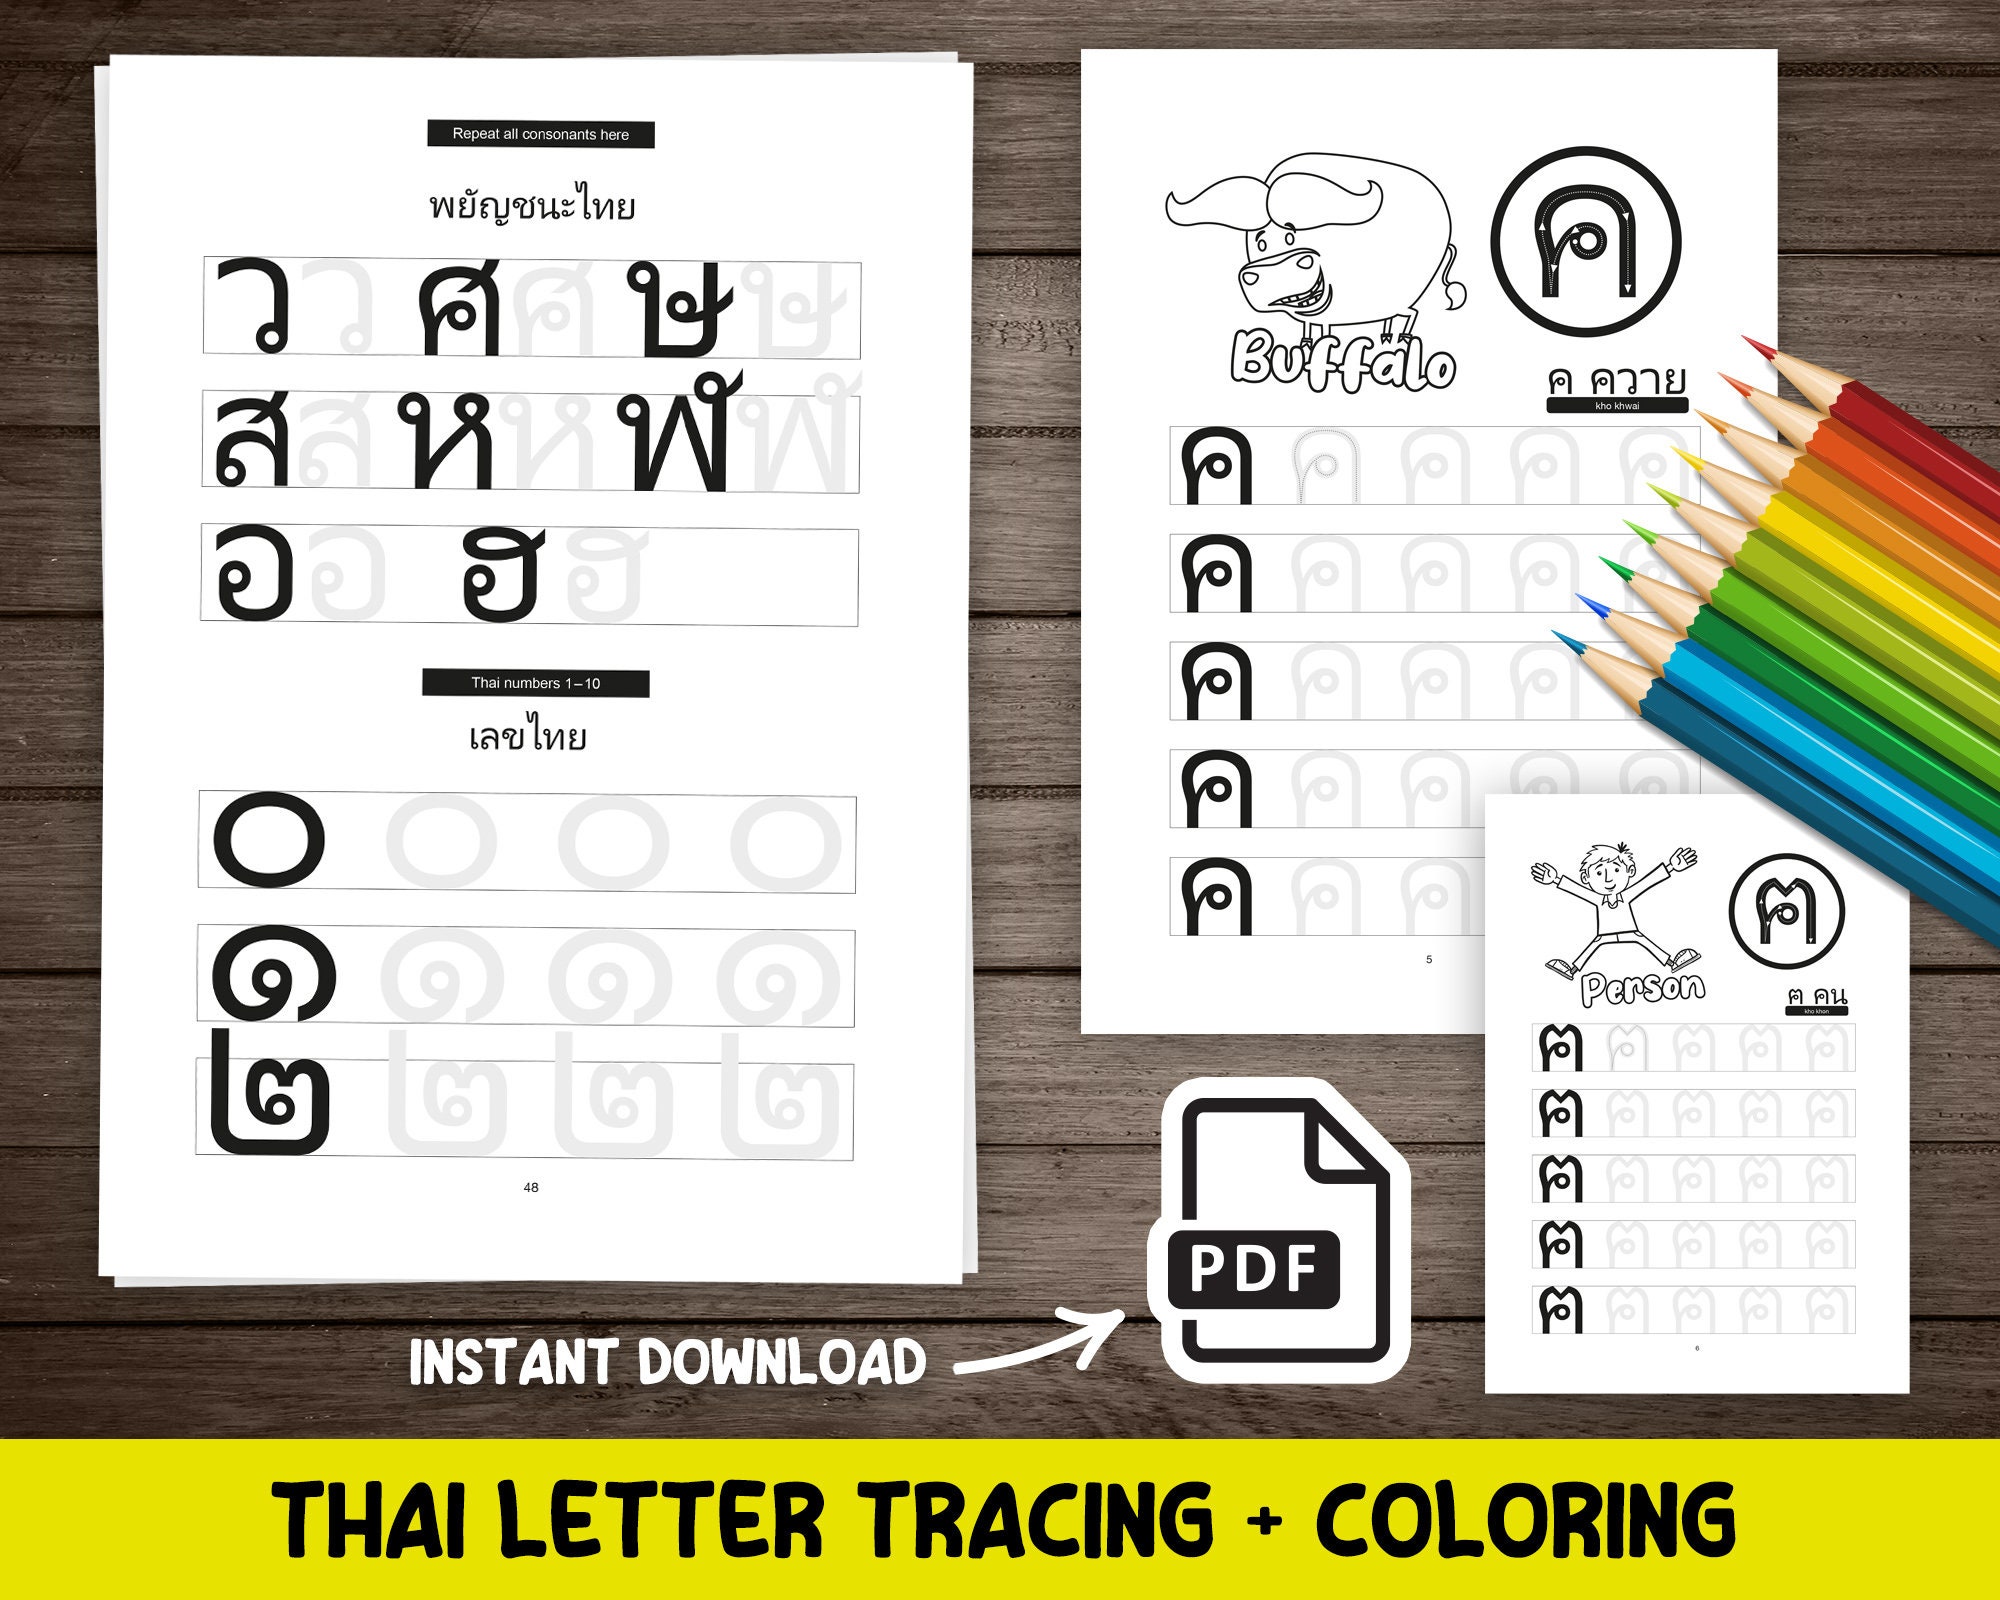 THAI LETTER TRACING Book, Learn to Write Thai Consonants, 44 Thai  Consonants/alphabets Letter Tracing Book With Words & Picture 